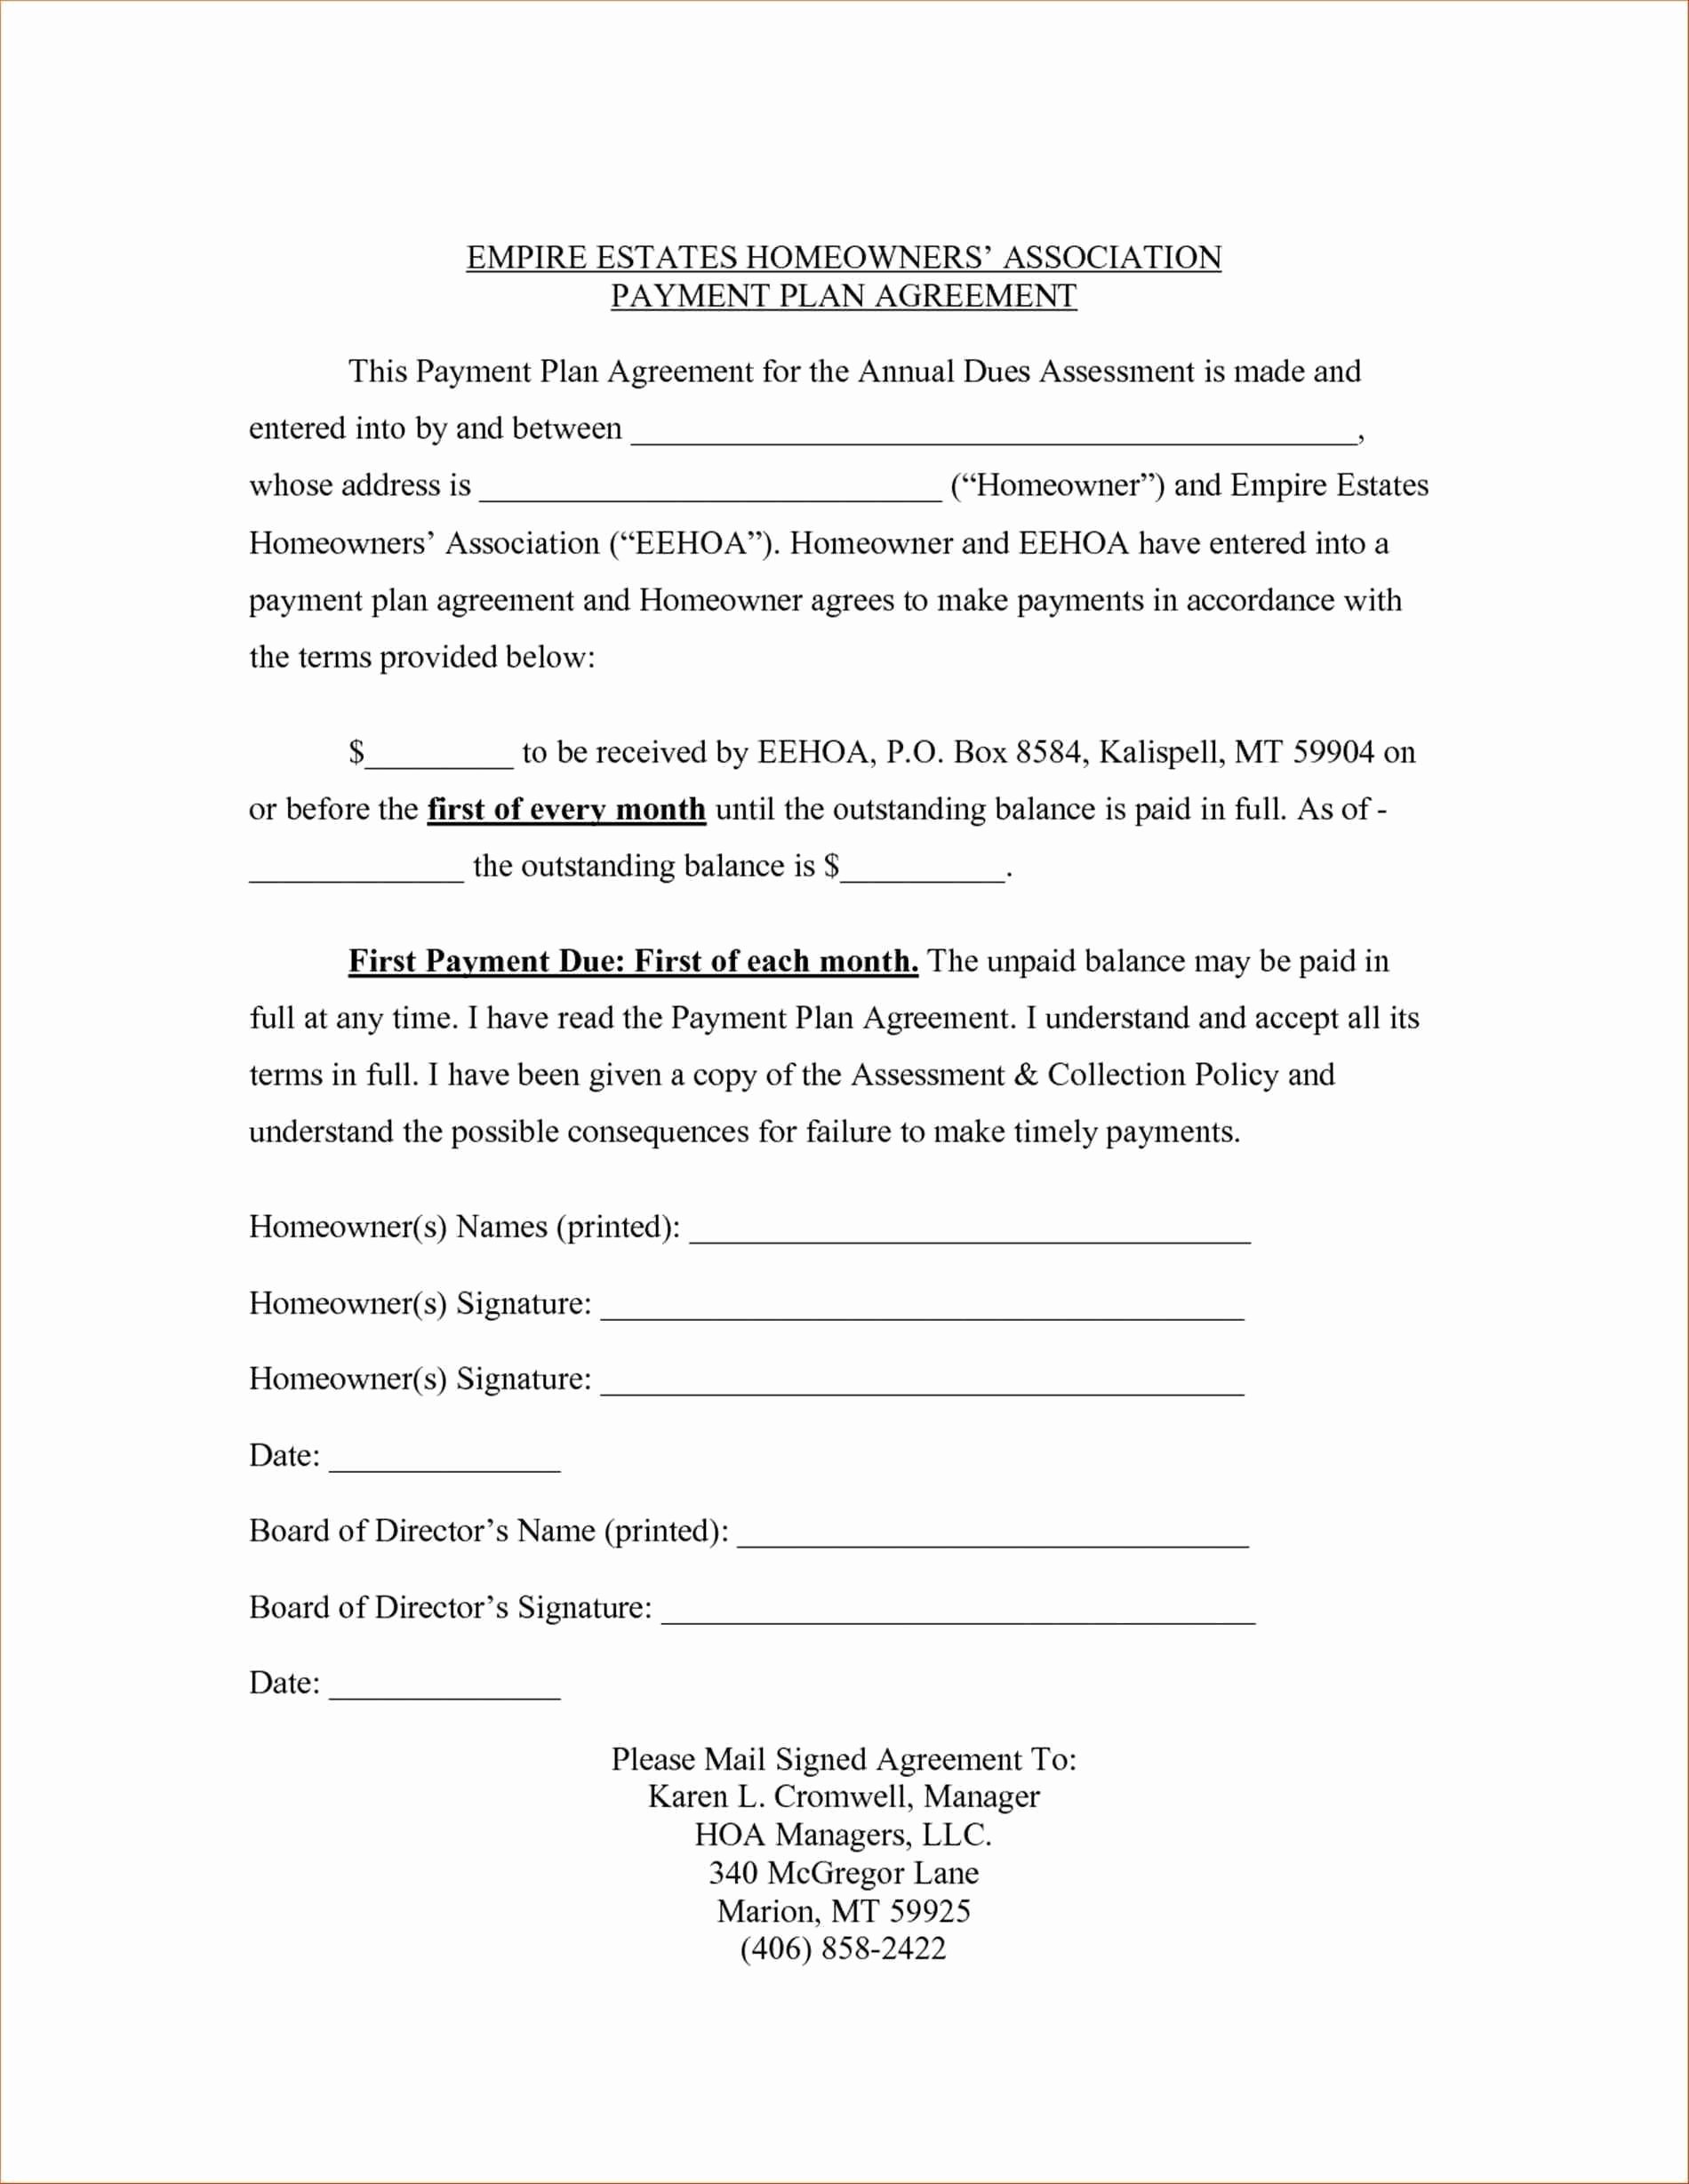 Letter Of Agreement Template Fresh Image Result for Payment Plan Contract Agreement Template